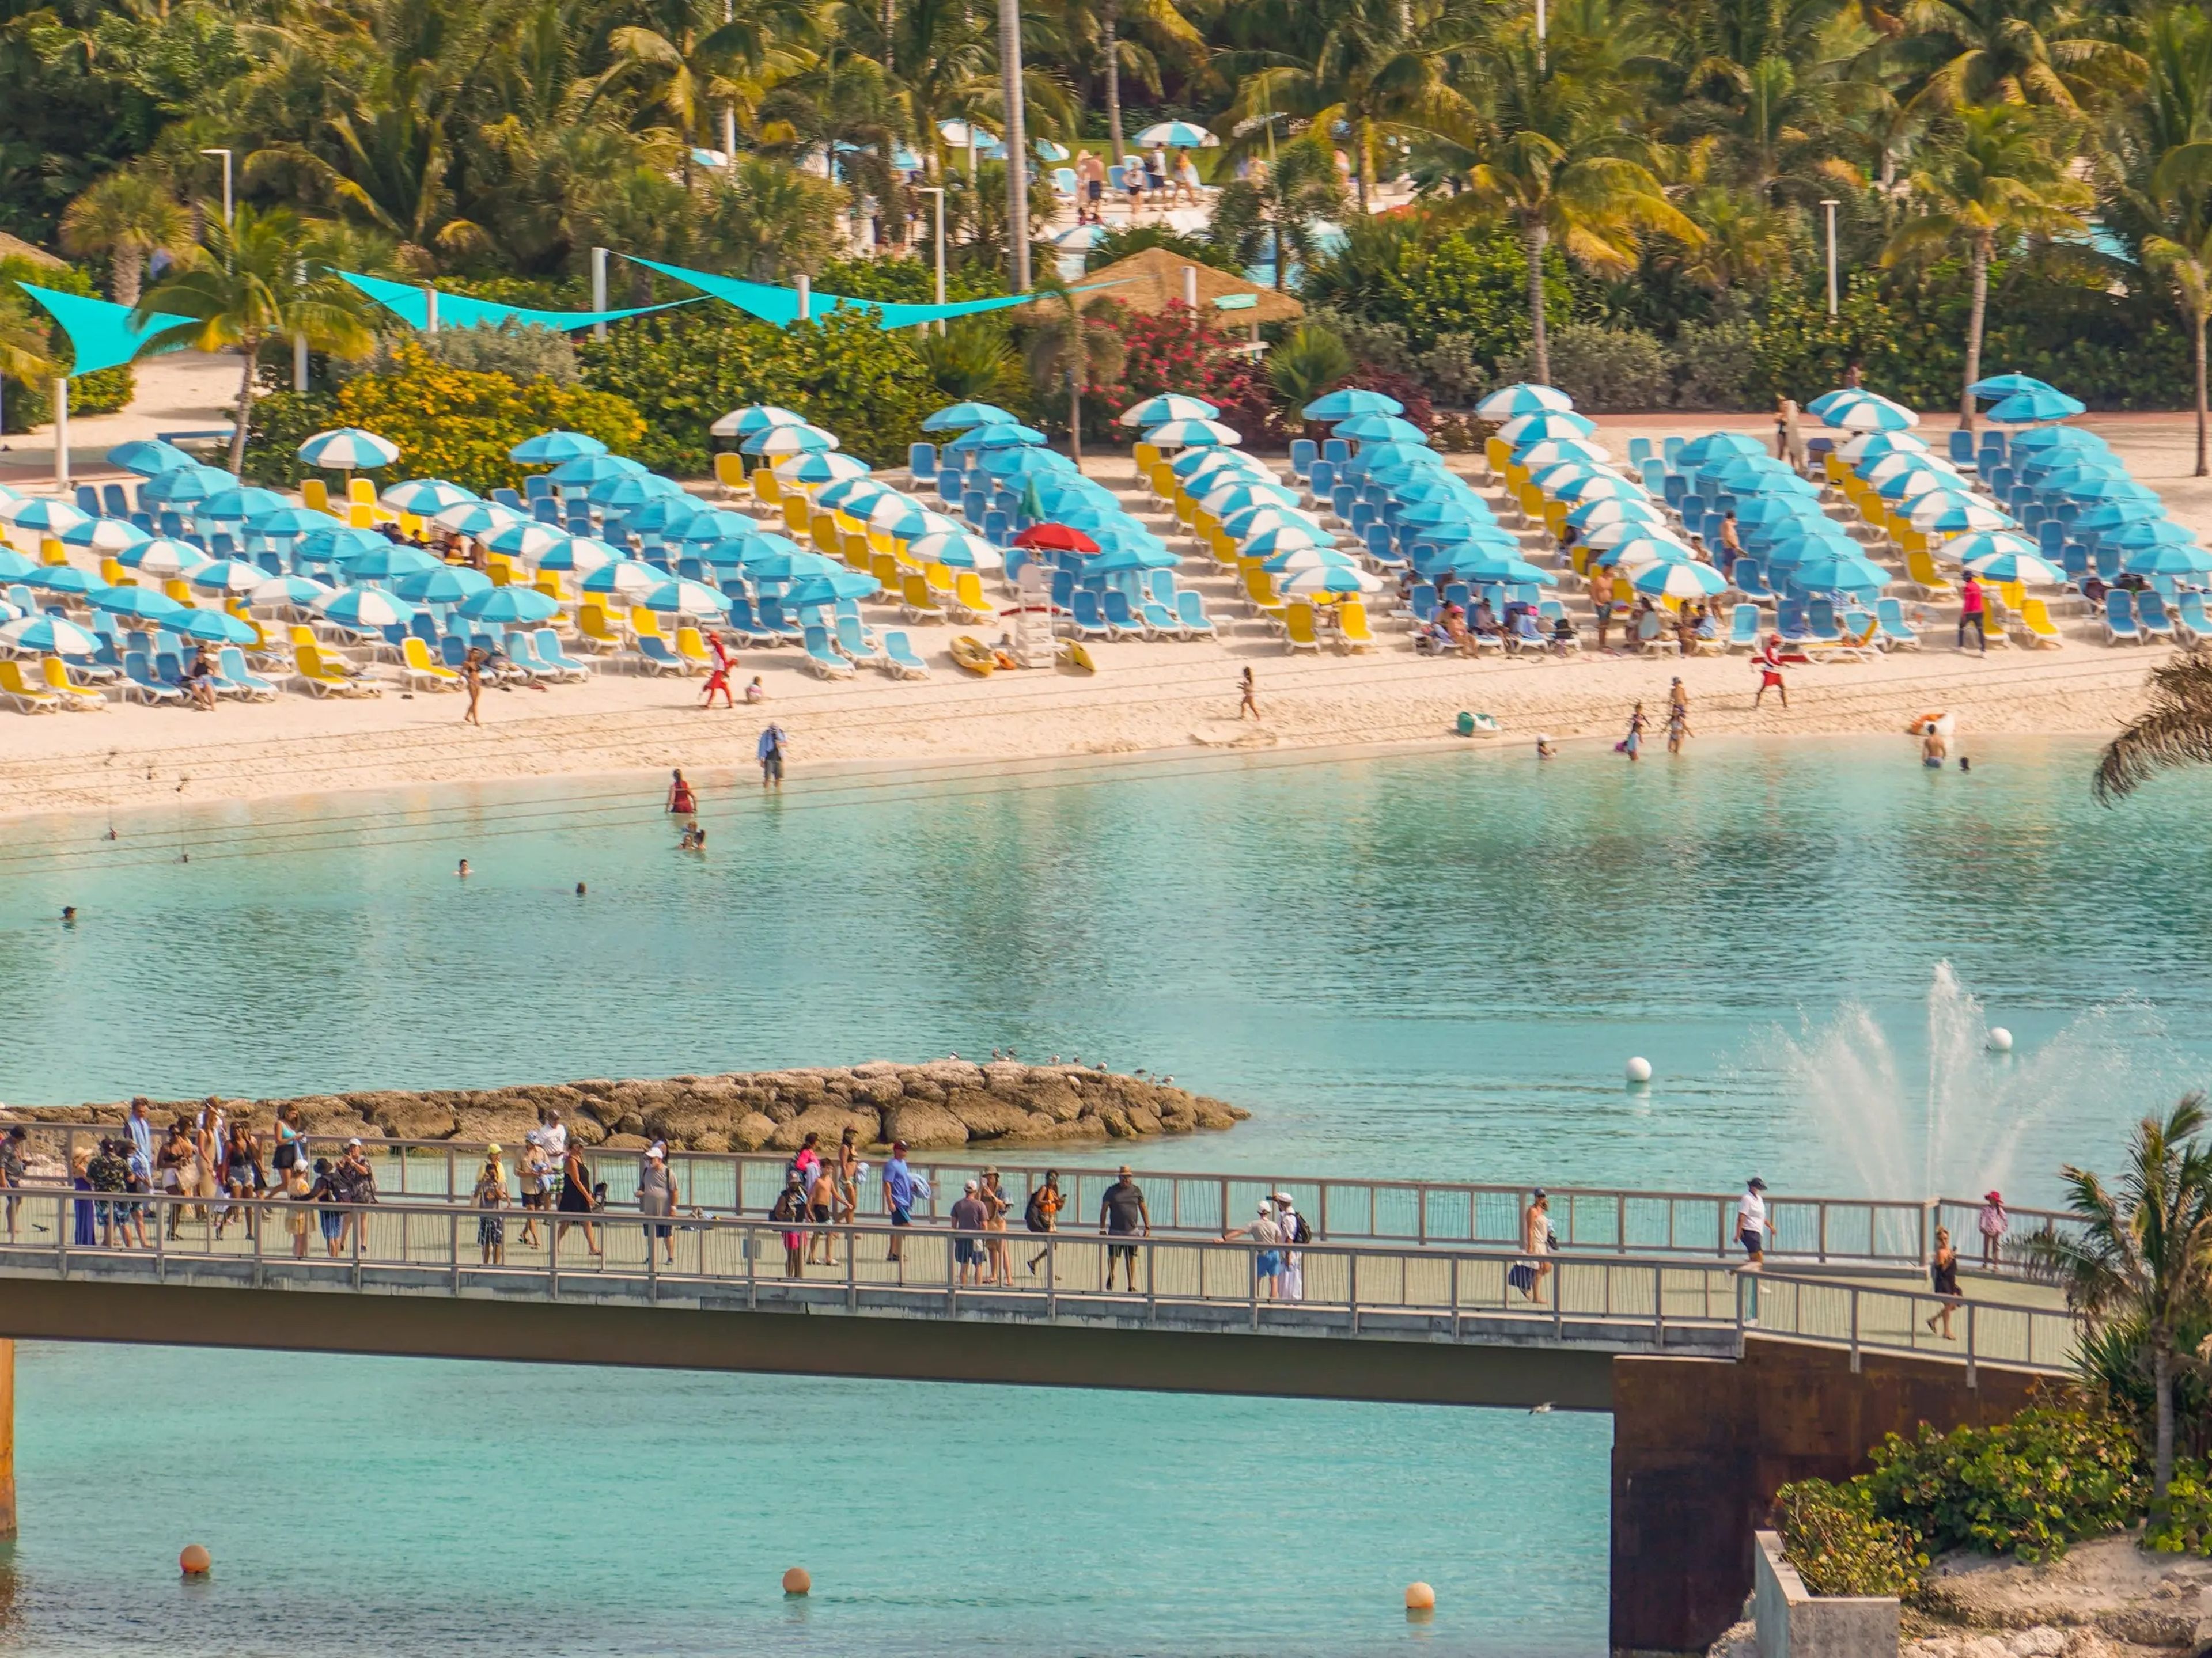 A beach at CocoCay behind a bridge with pedestrians walking across it